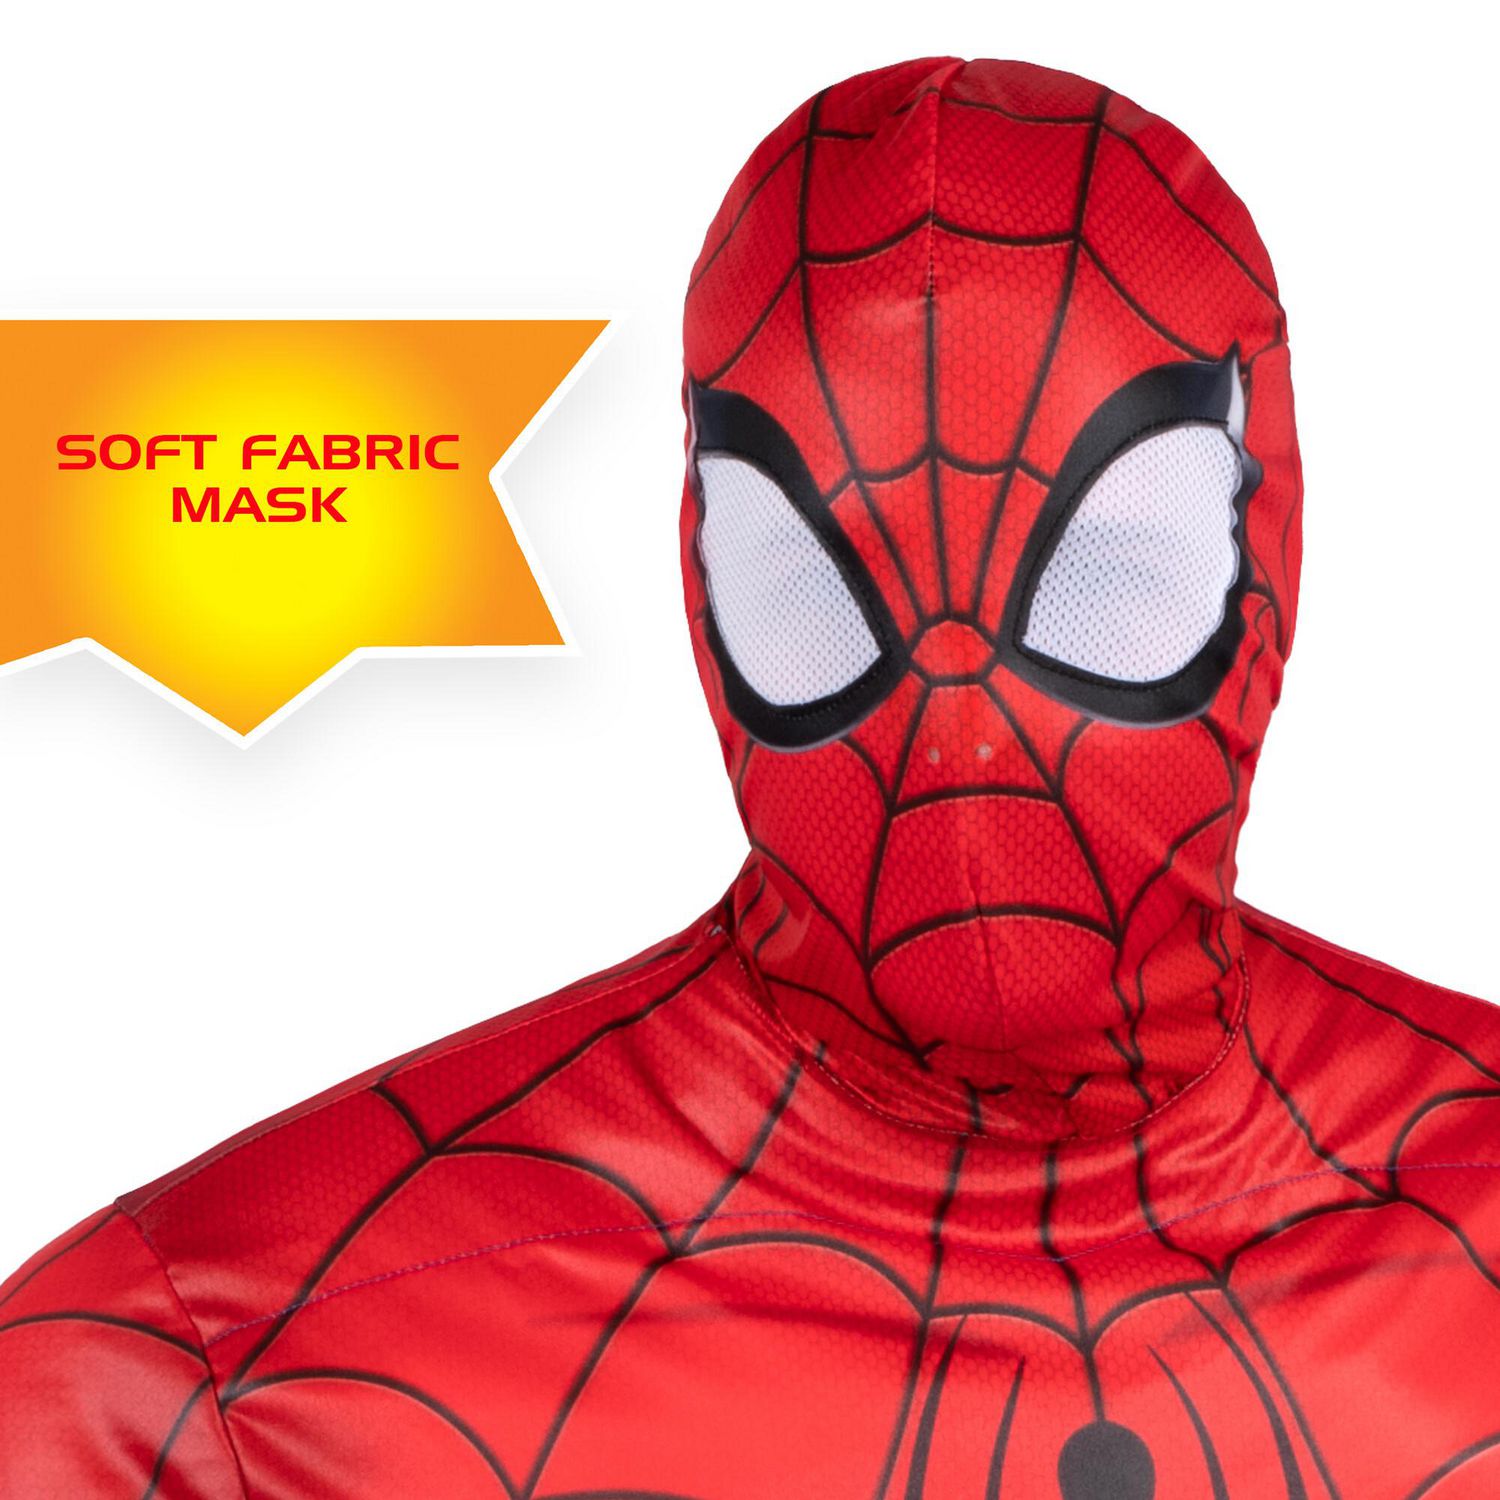 MARVEL'S SPIDER-MAN QUALUX COSTUME (ADULT) Poly Jersey Jumpsuit Stuffed  with Polyfill and Fabric Mask